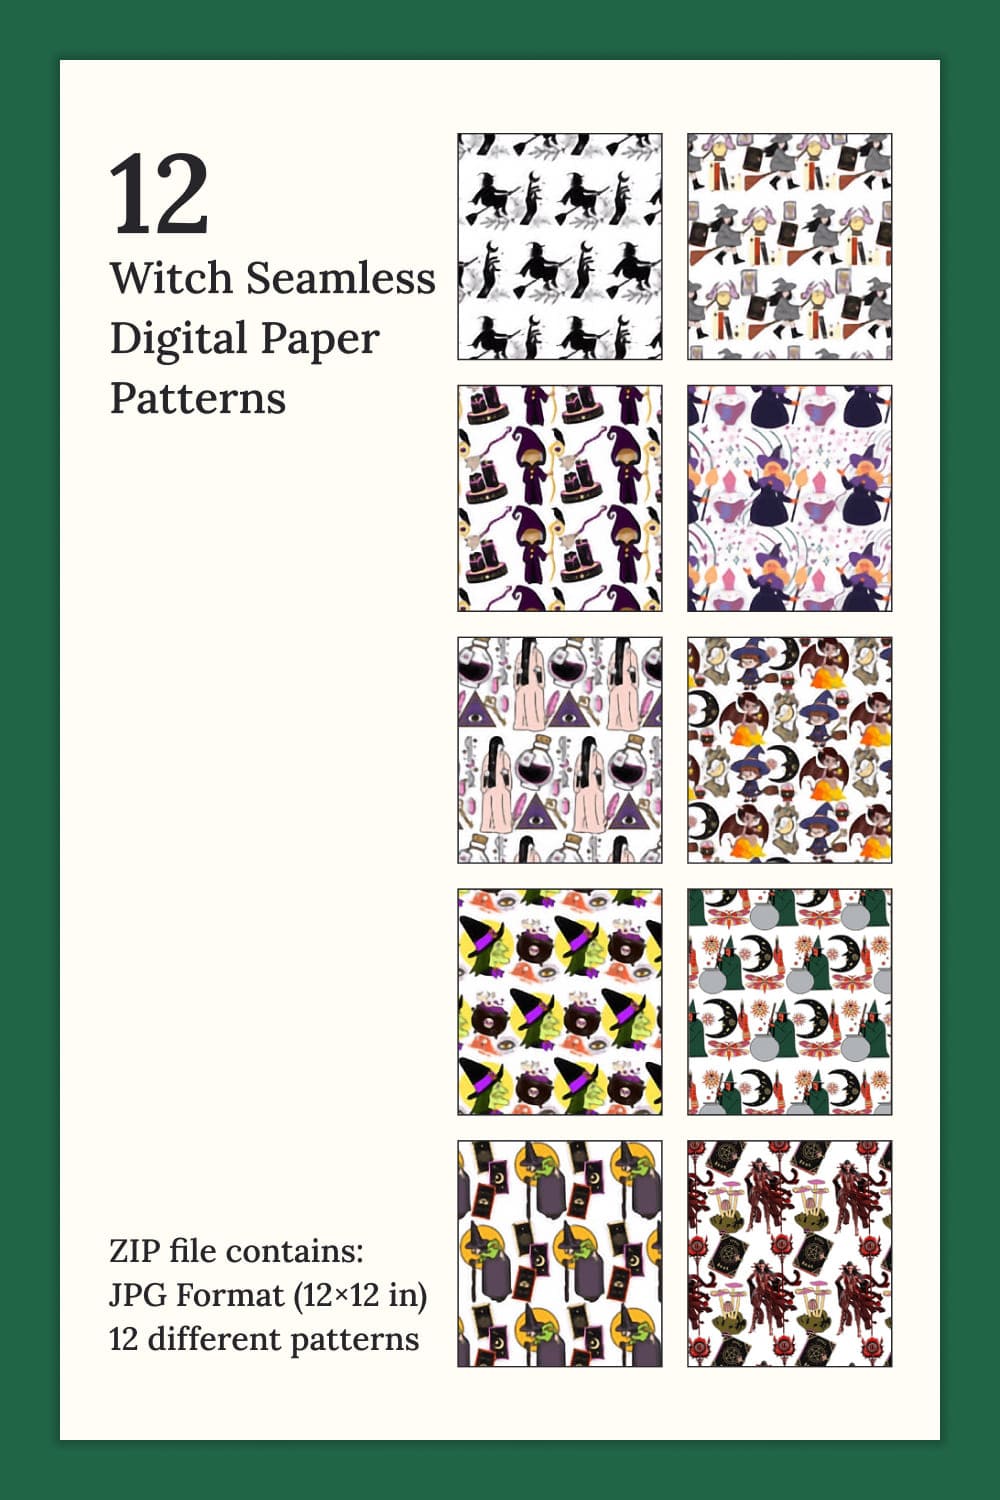 12 different patterns of witches.